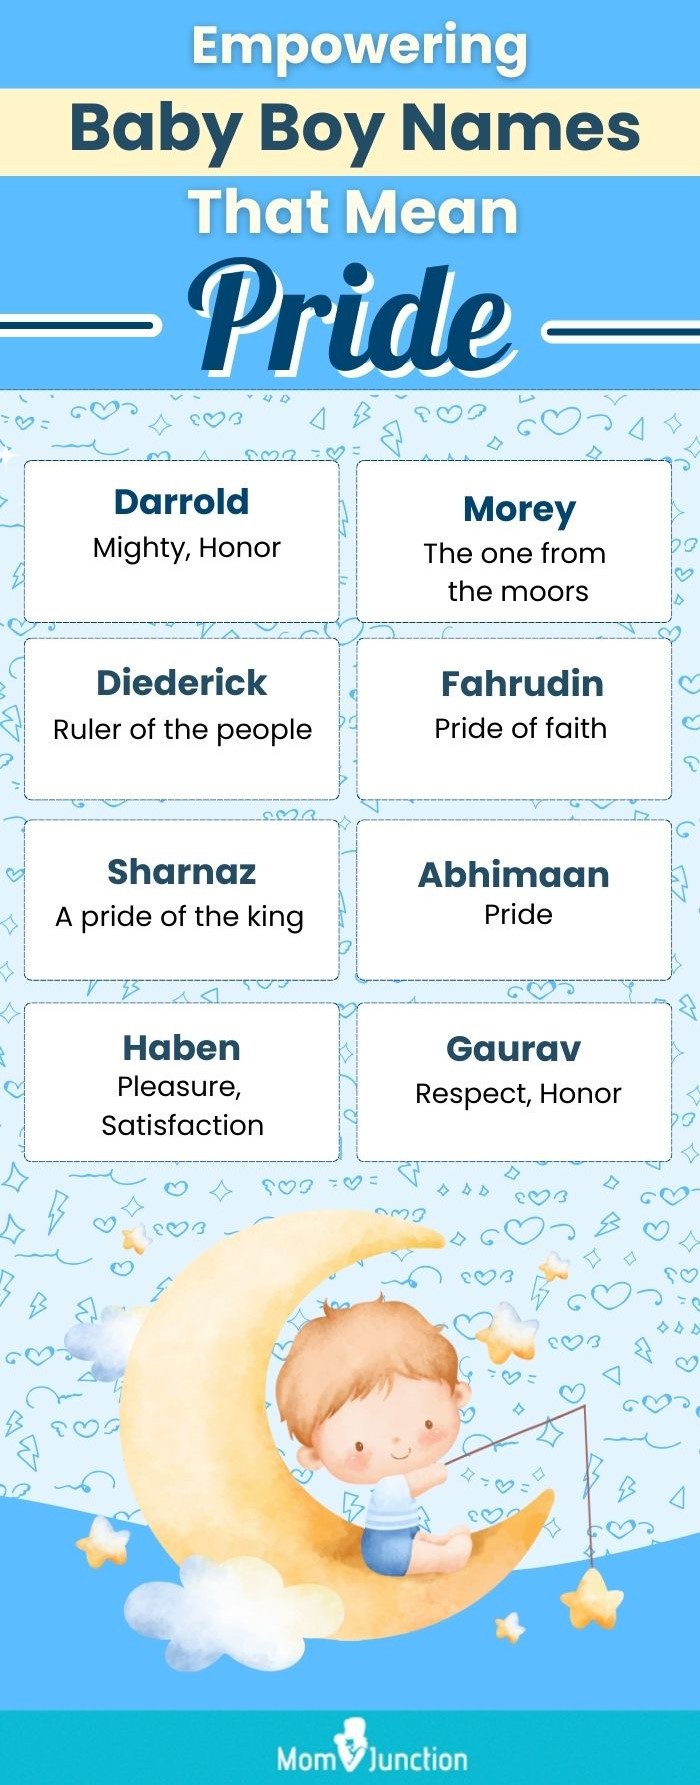 empowering baby boy names that mean pride (infographic)